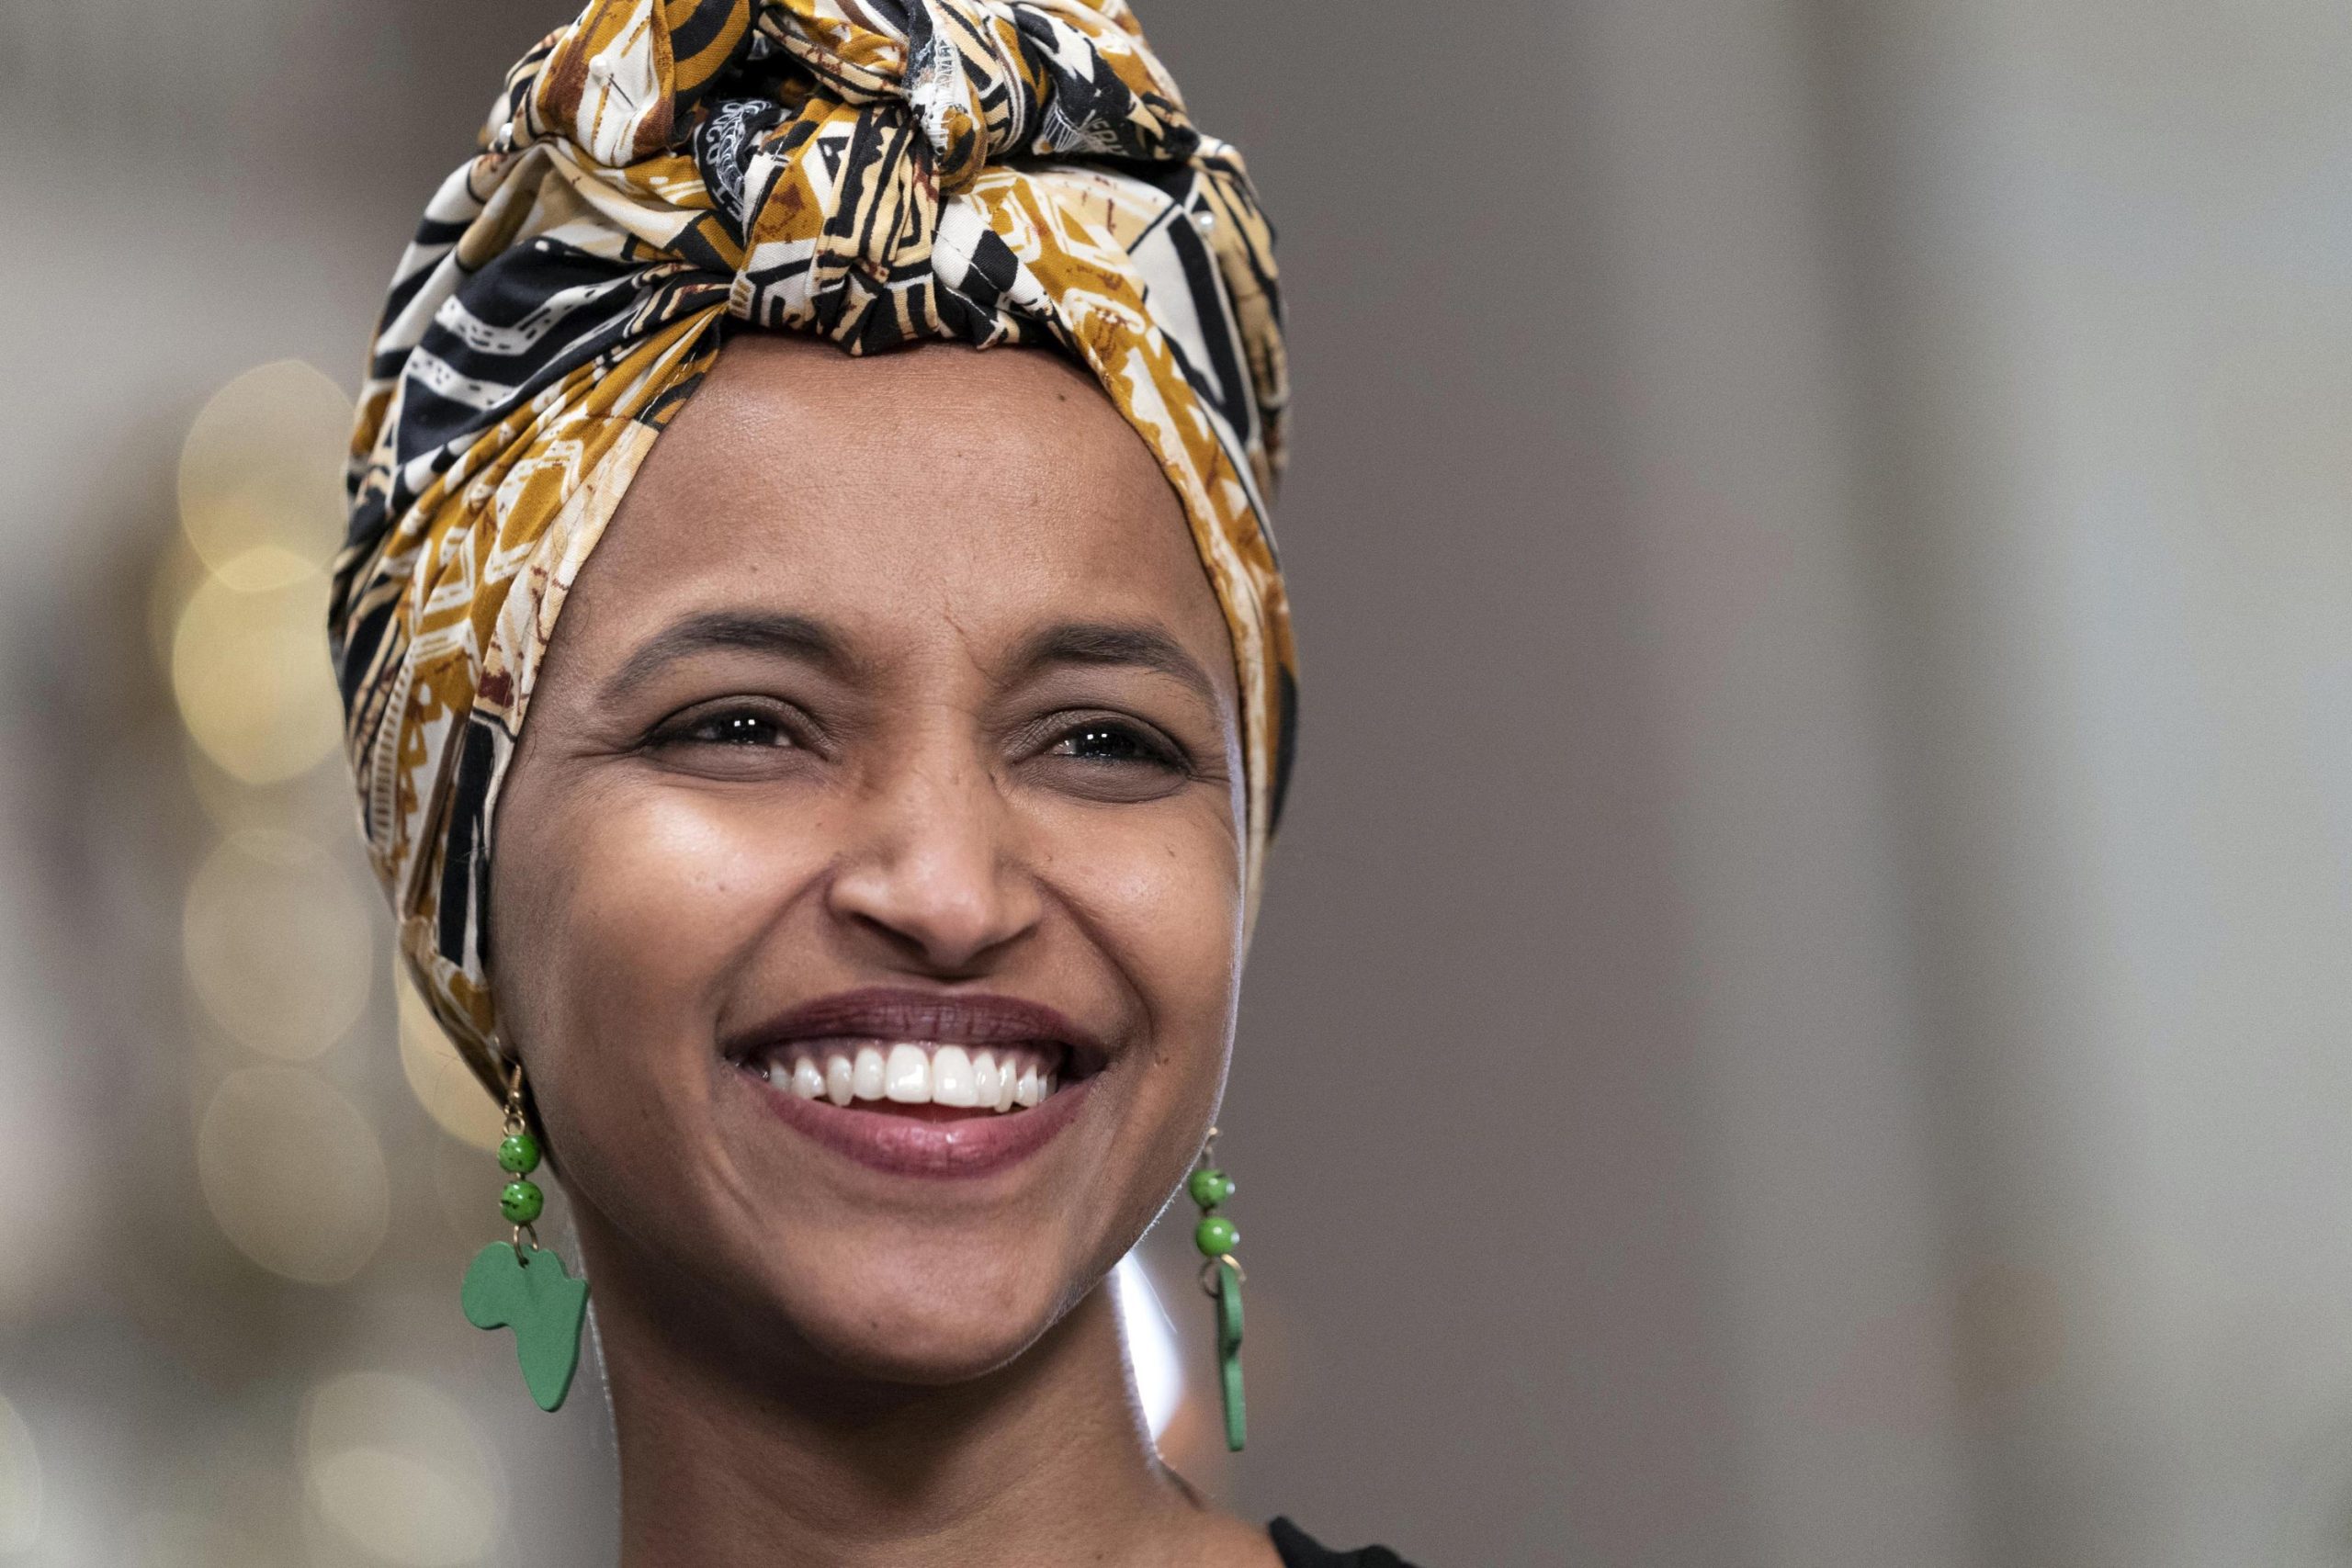 Ilhan Omar | Biography | Age | Child | Family | Career | Or | More post thumbnail image